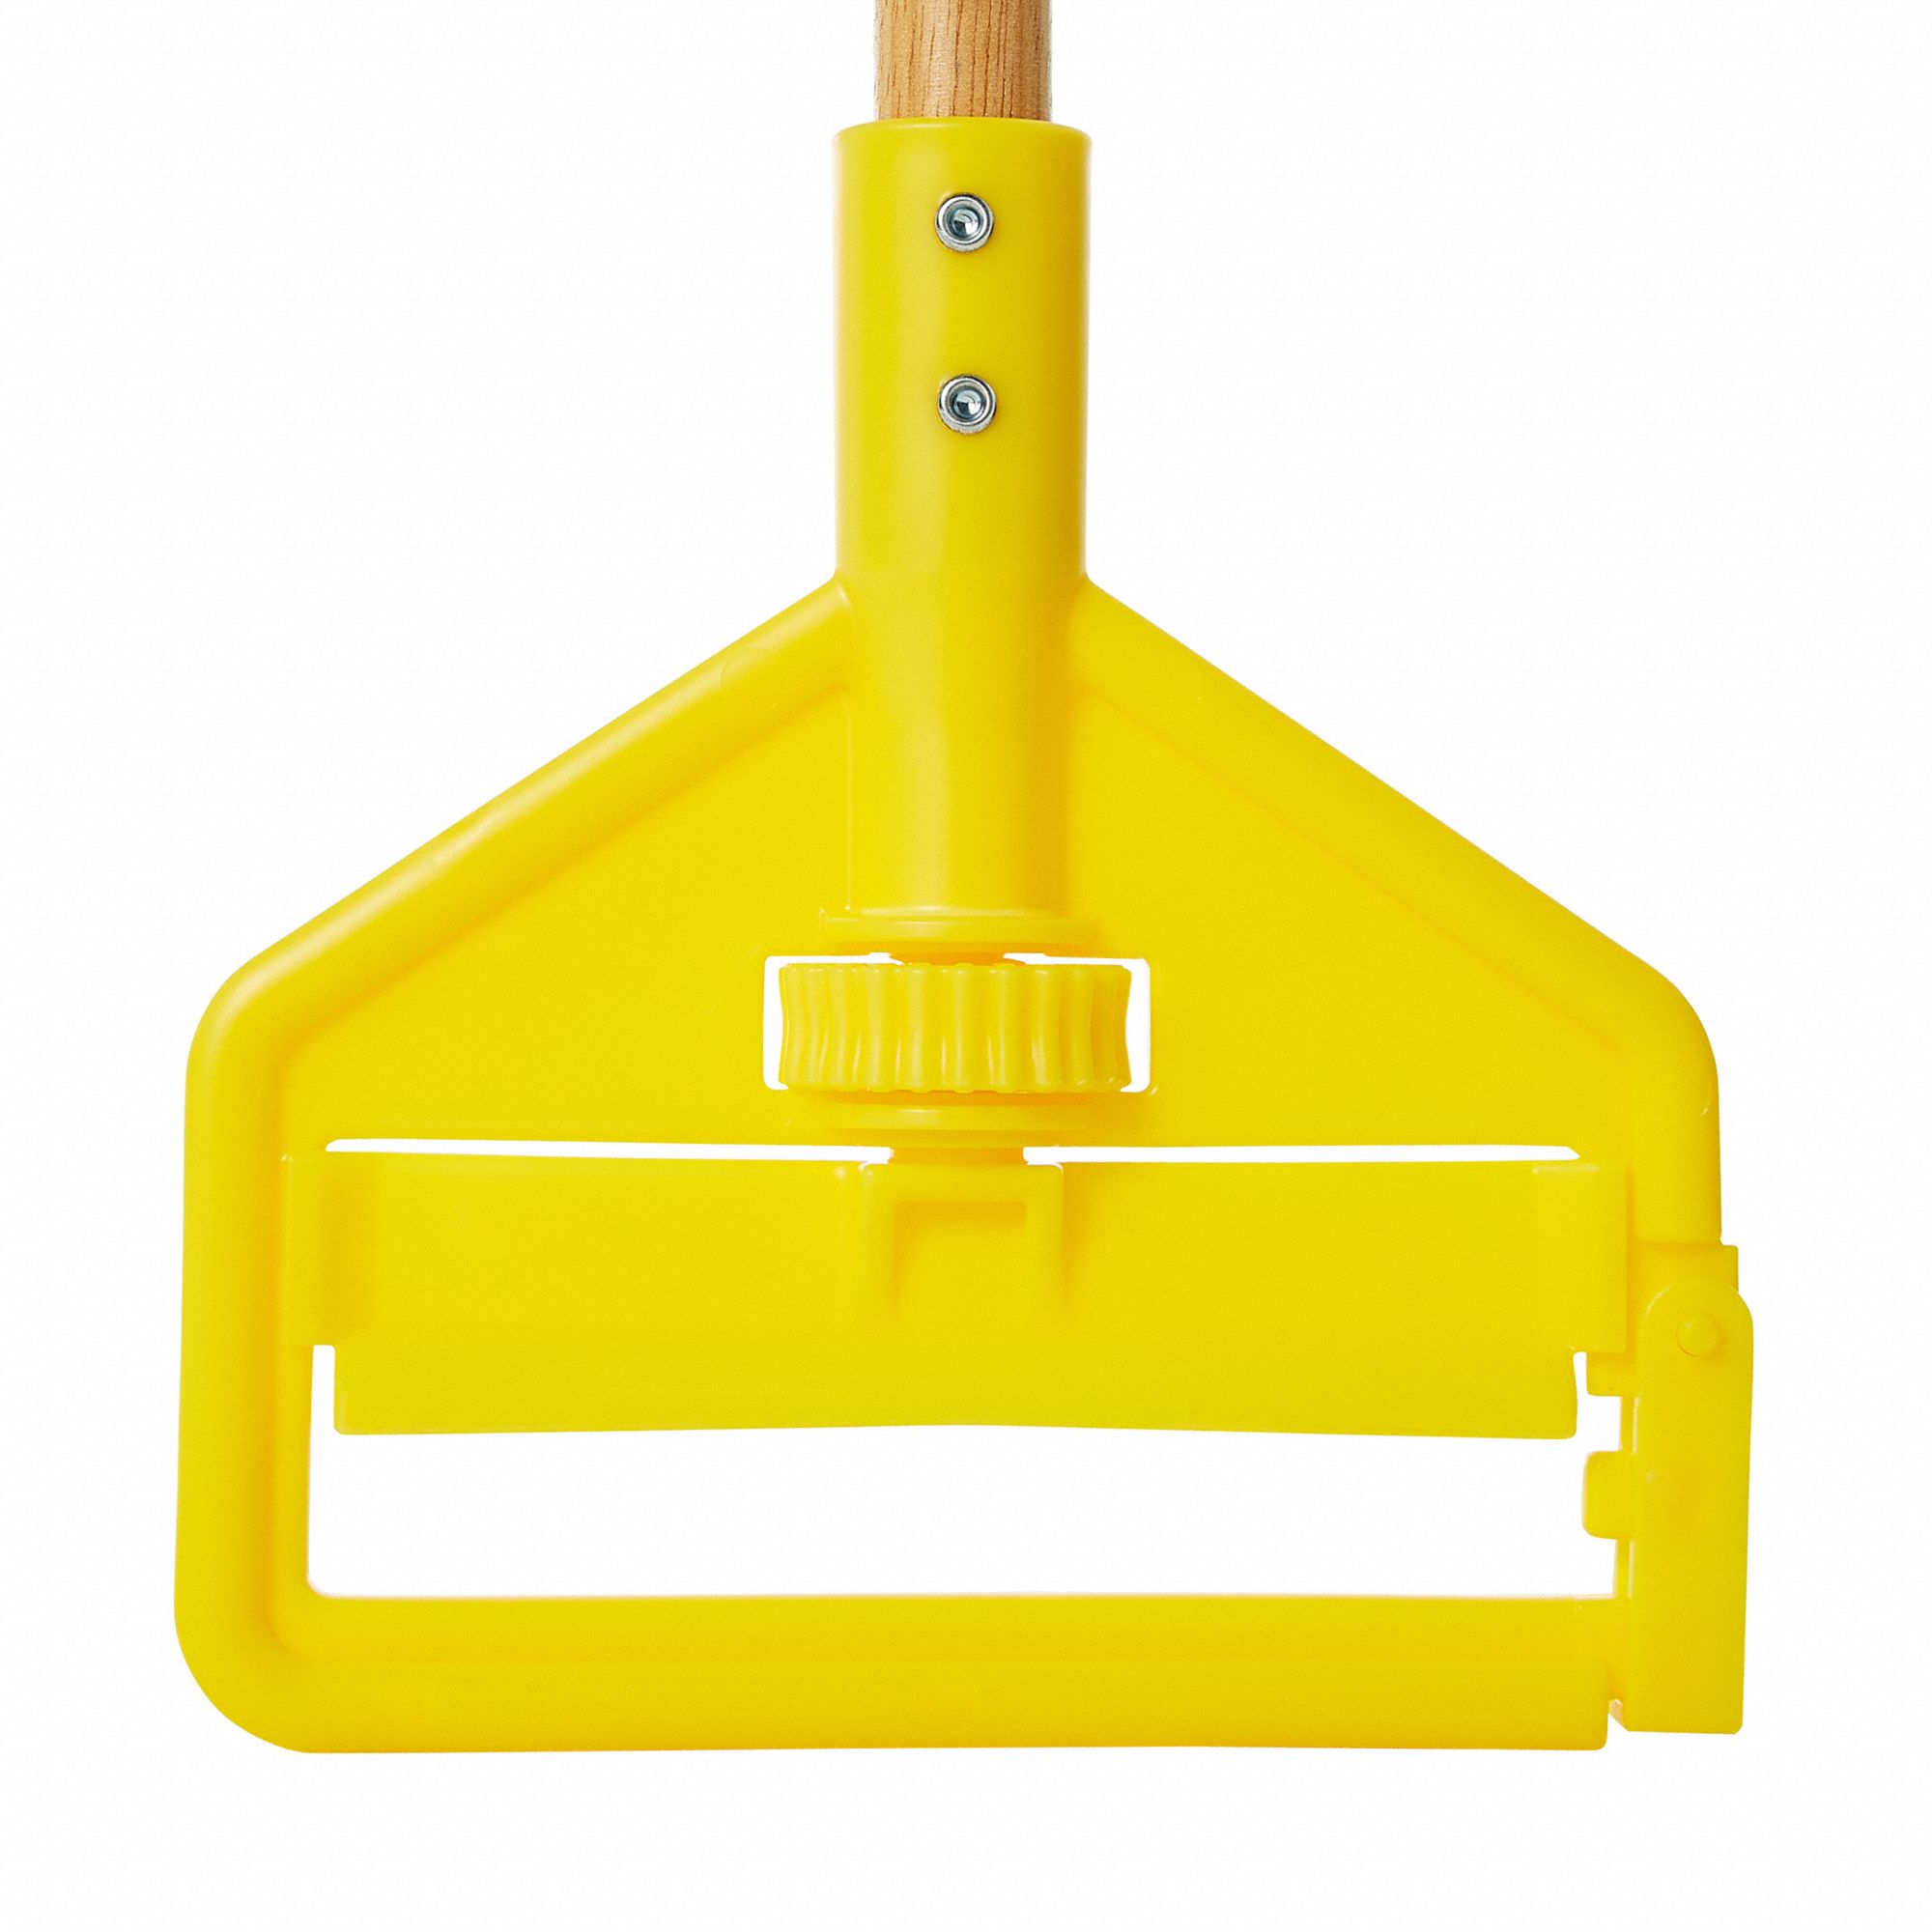 Rubbermaid H115 Invader 54" Side-Gate Wet-Mop Handle RCPH115 Natural/Yellow 